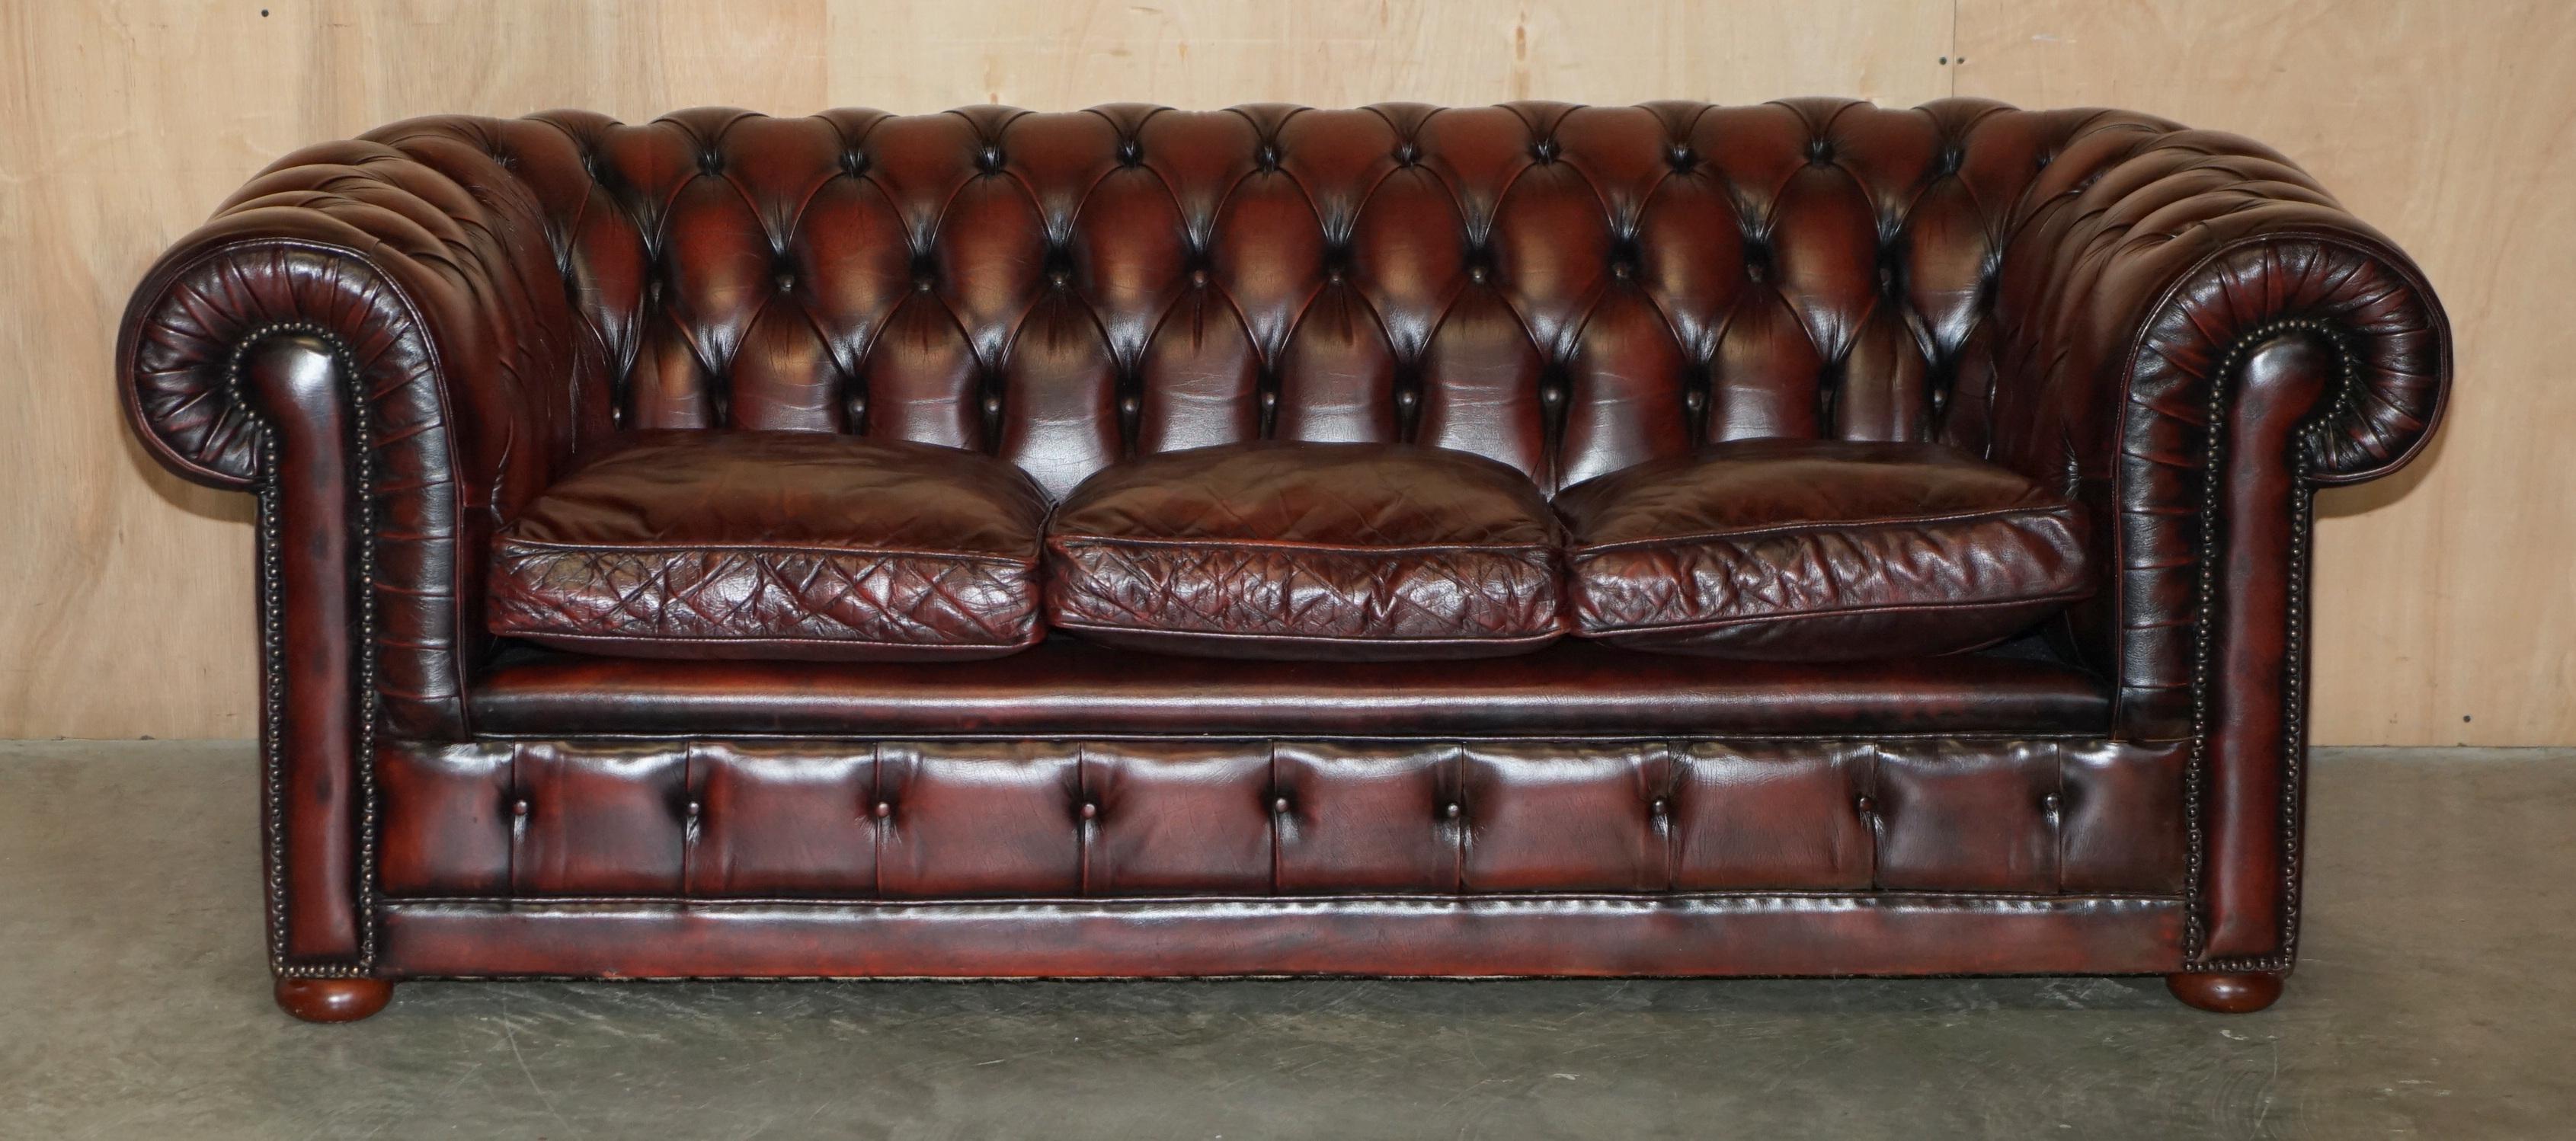 Royal House Antiques

Royal House Antiques is delighted to offer for sale this stunning very rare hand made in England fully restored Bordeaux leather Gentleman's club sofa

Please note the delivery fee listed is just a guide, it covers within the